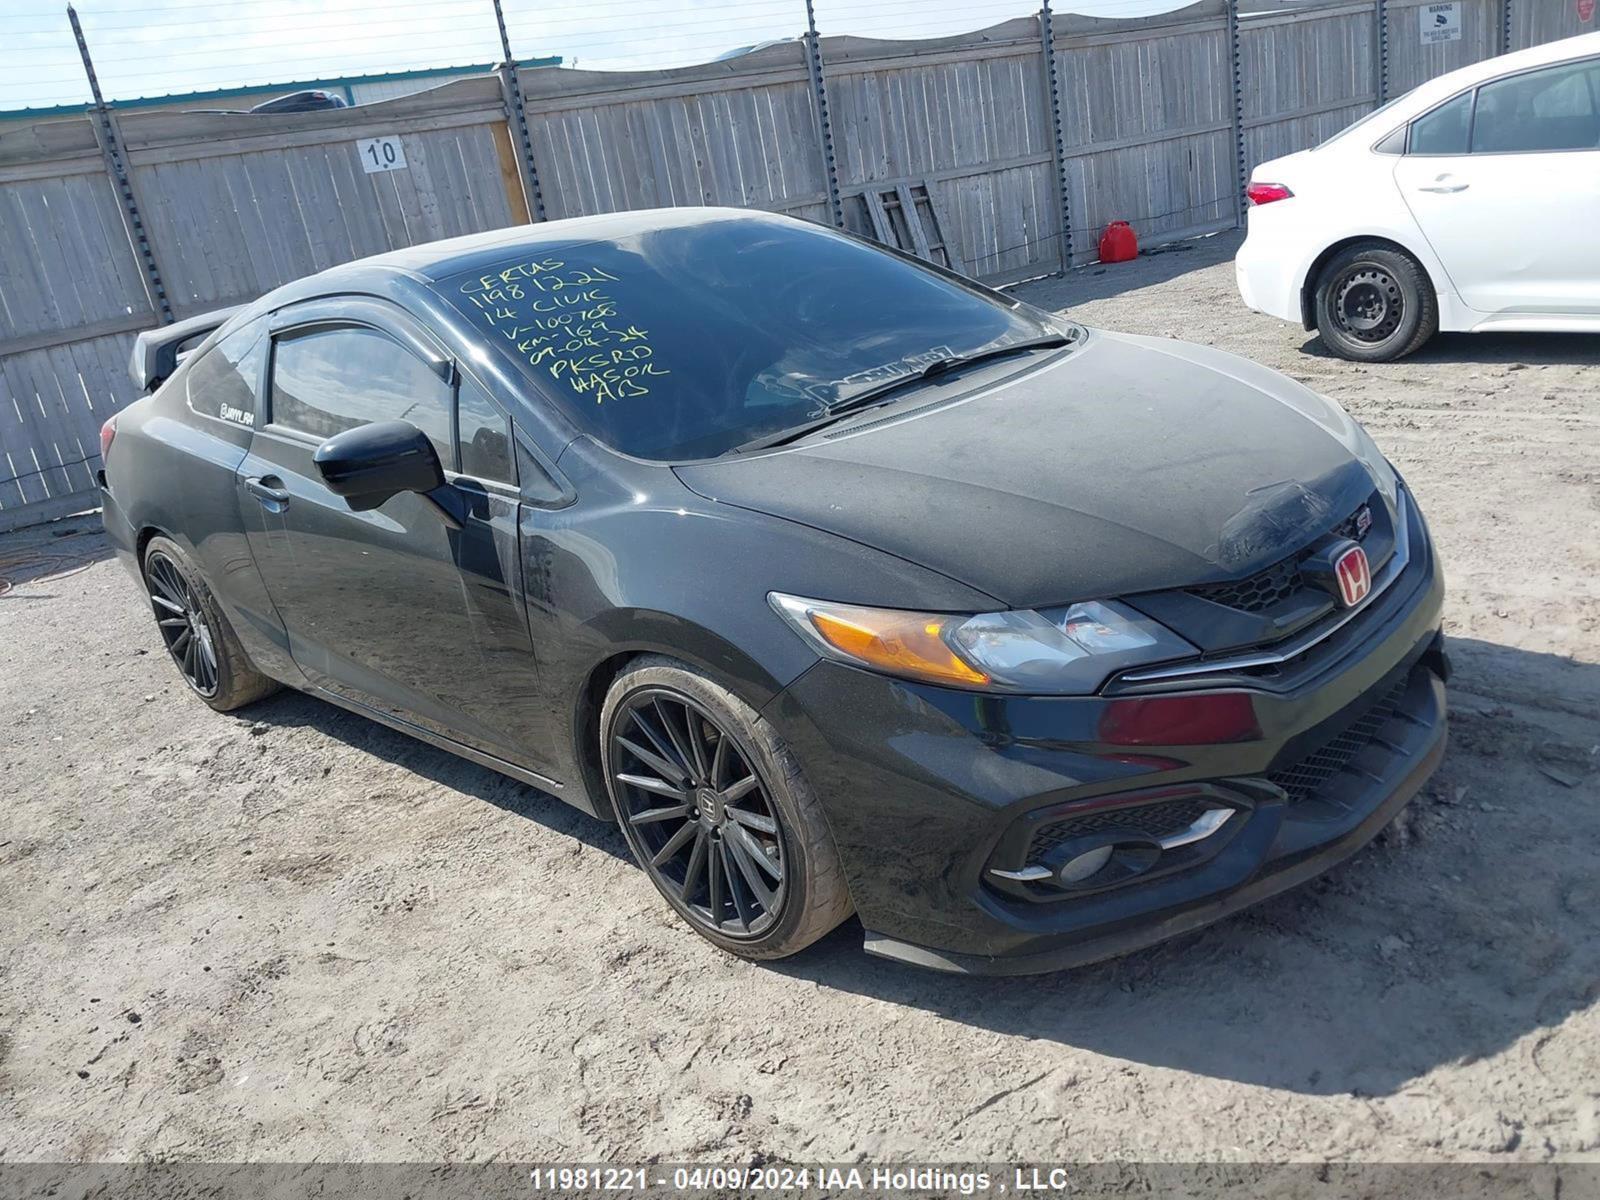 vin: 2HGFG4A50EH100708 2HGFG4A50EH100708 2014 honda civic 2400 for Sale in l1j6g5, 535 Wentworth St W , Oshawa, Ontario, Canada